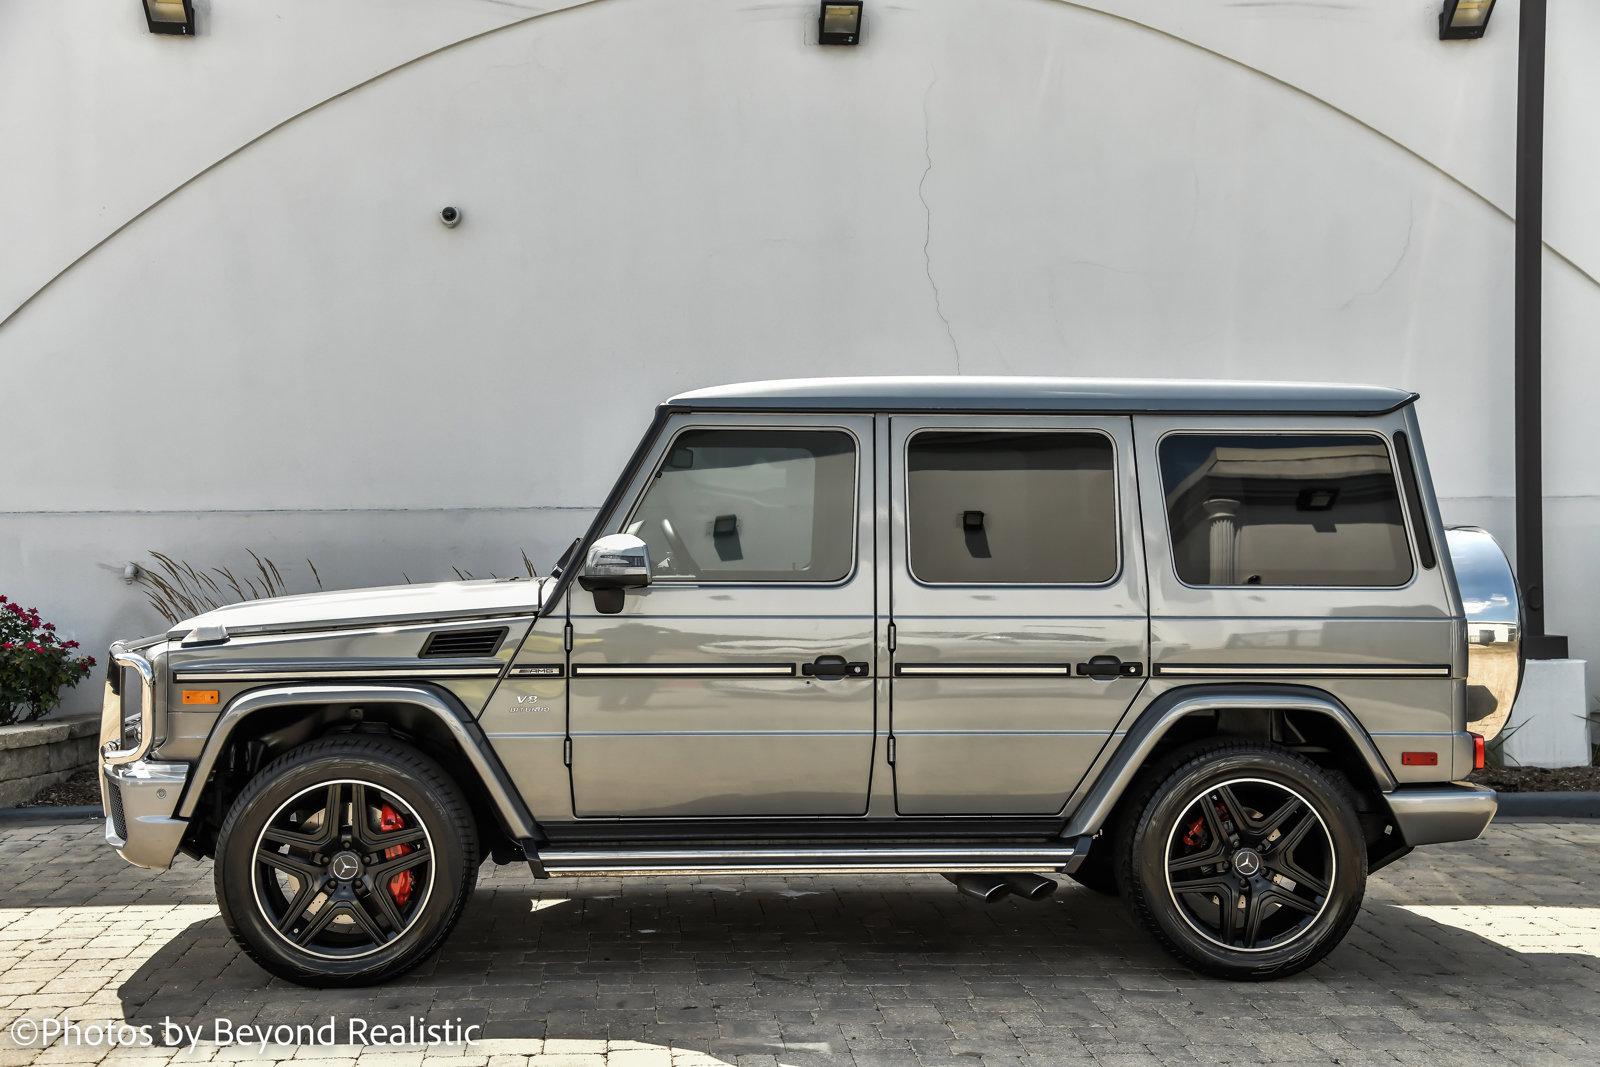 Used 2018 Mercedes-Benz G-Class AMG G 63 Designo | Downers Grove, IL